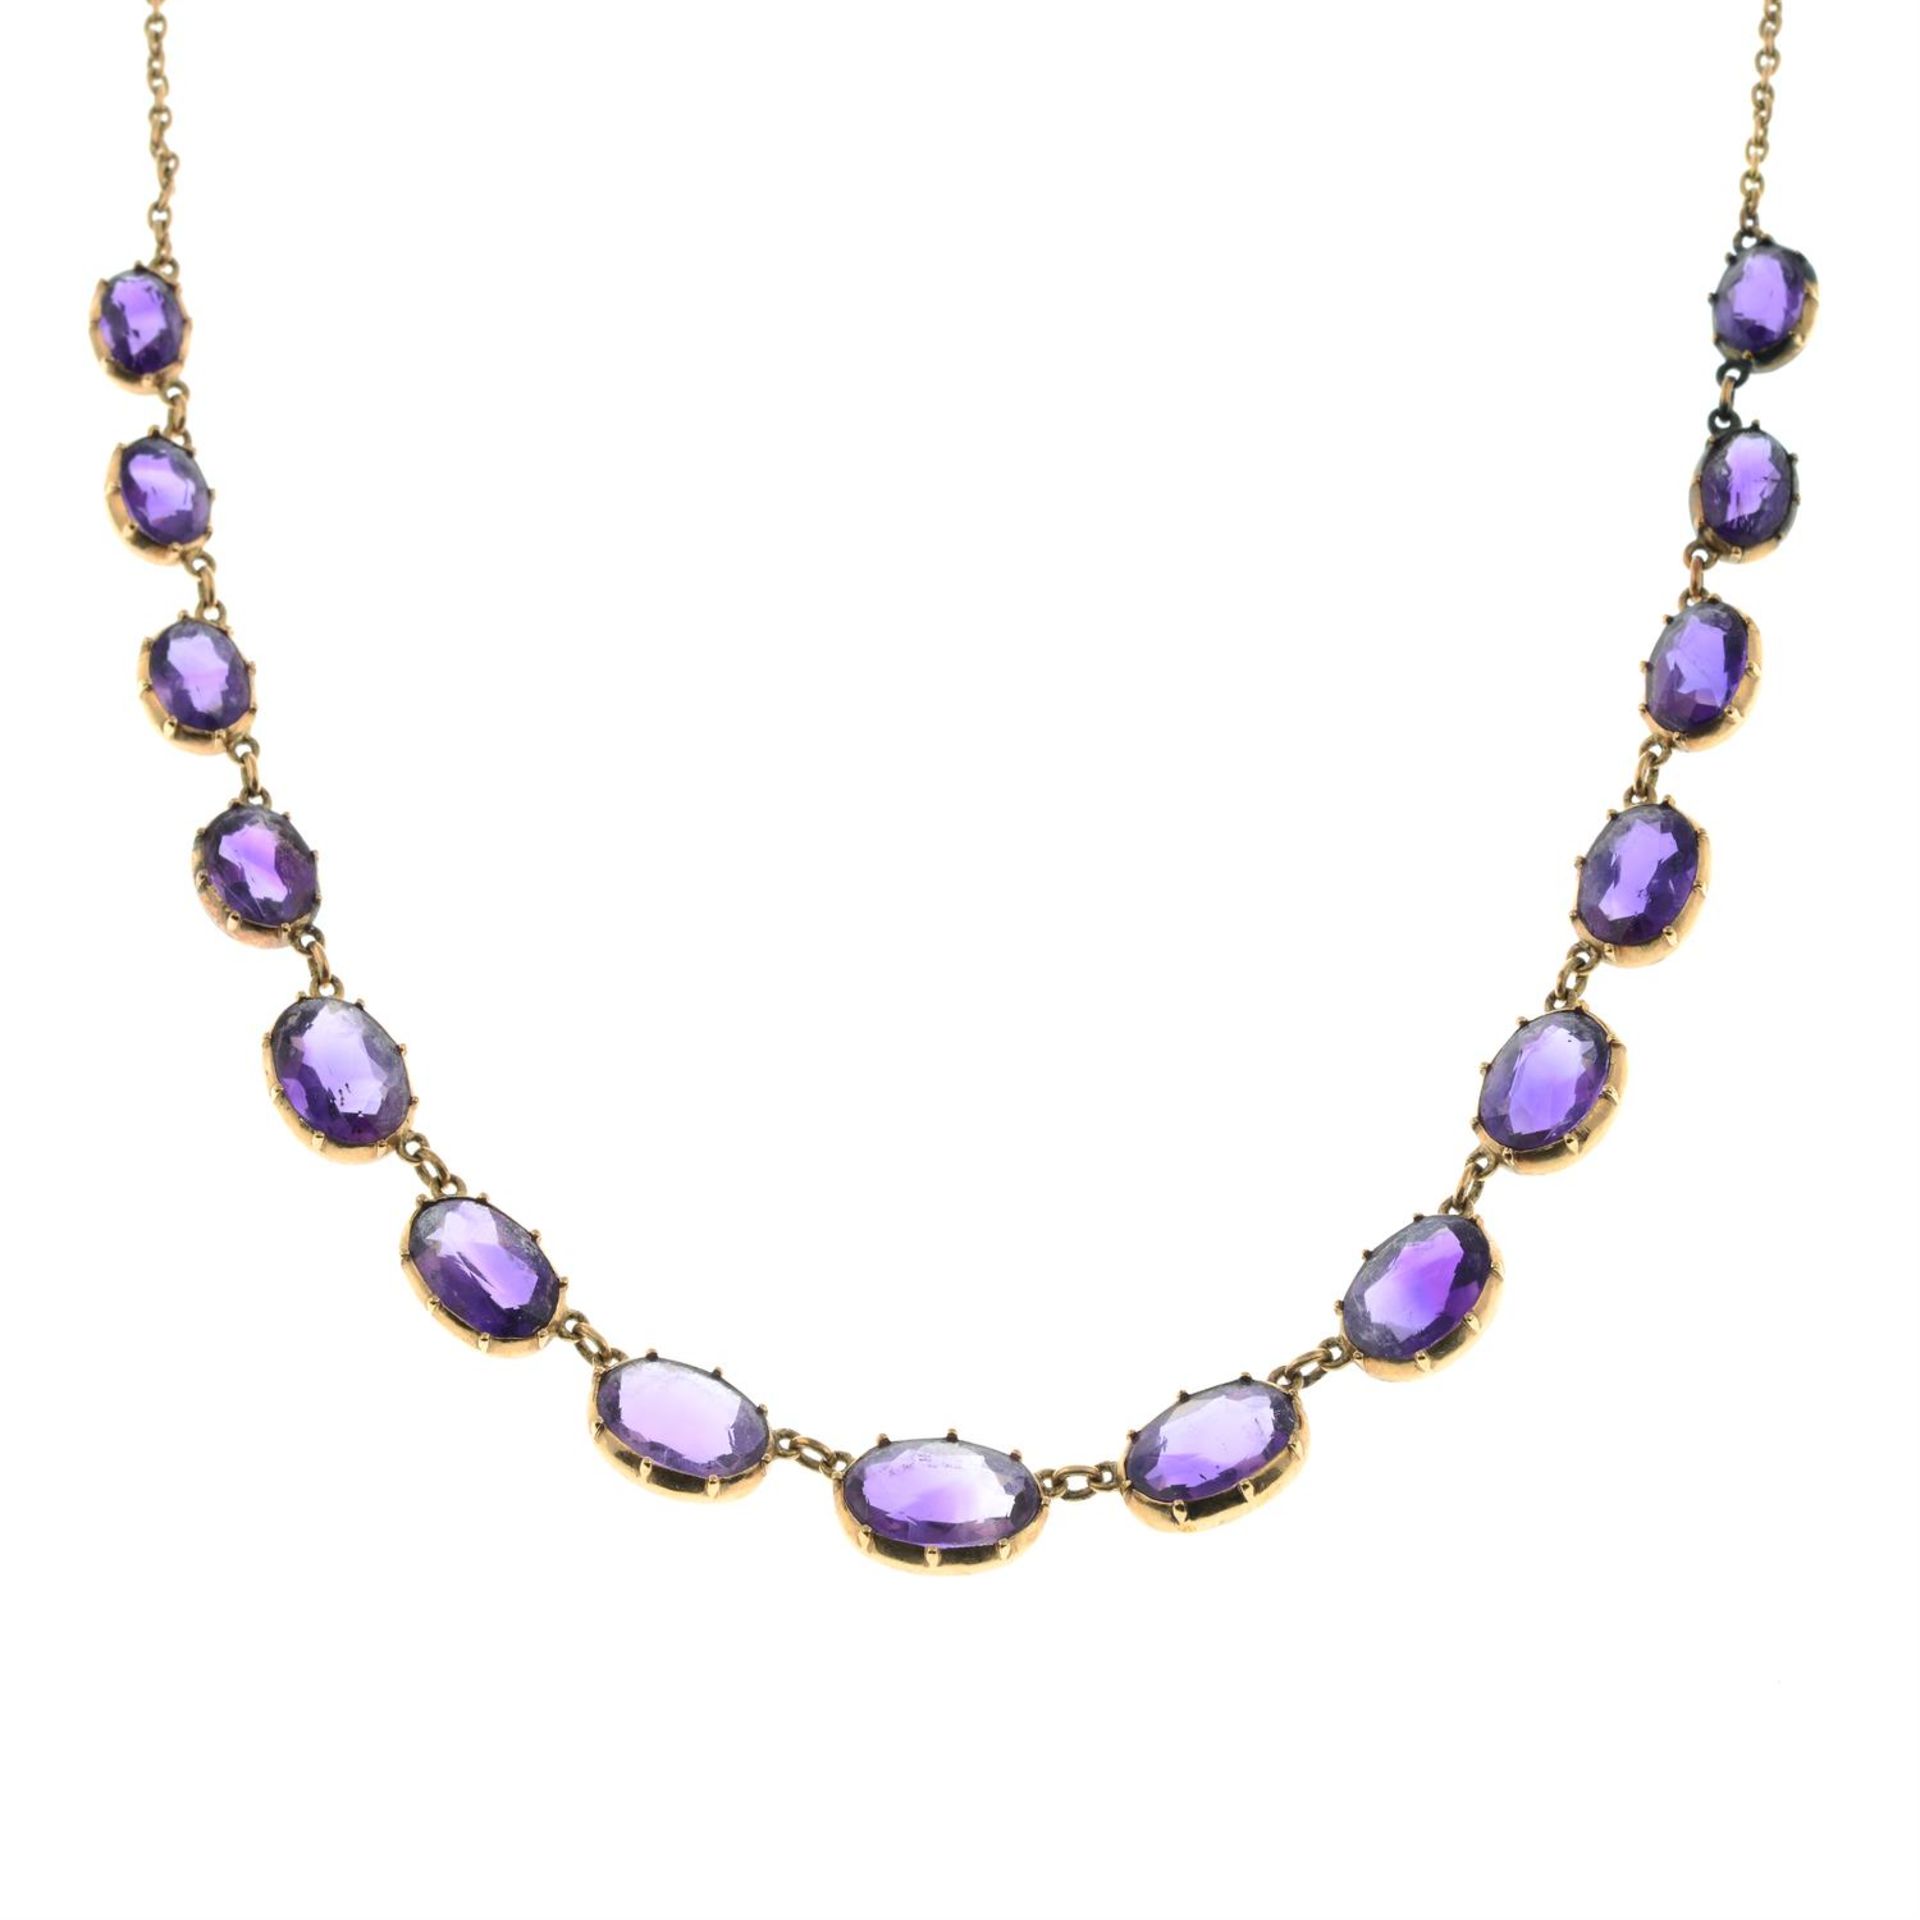 A 19th century gold graduated amethyst rivière necklace, with chain-link back-chain. - Image 2 of 4